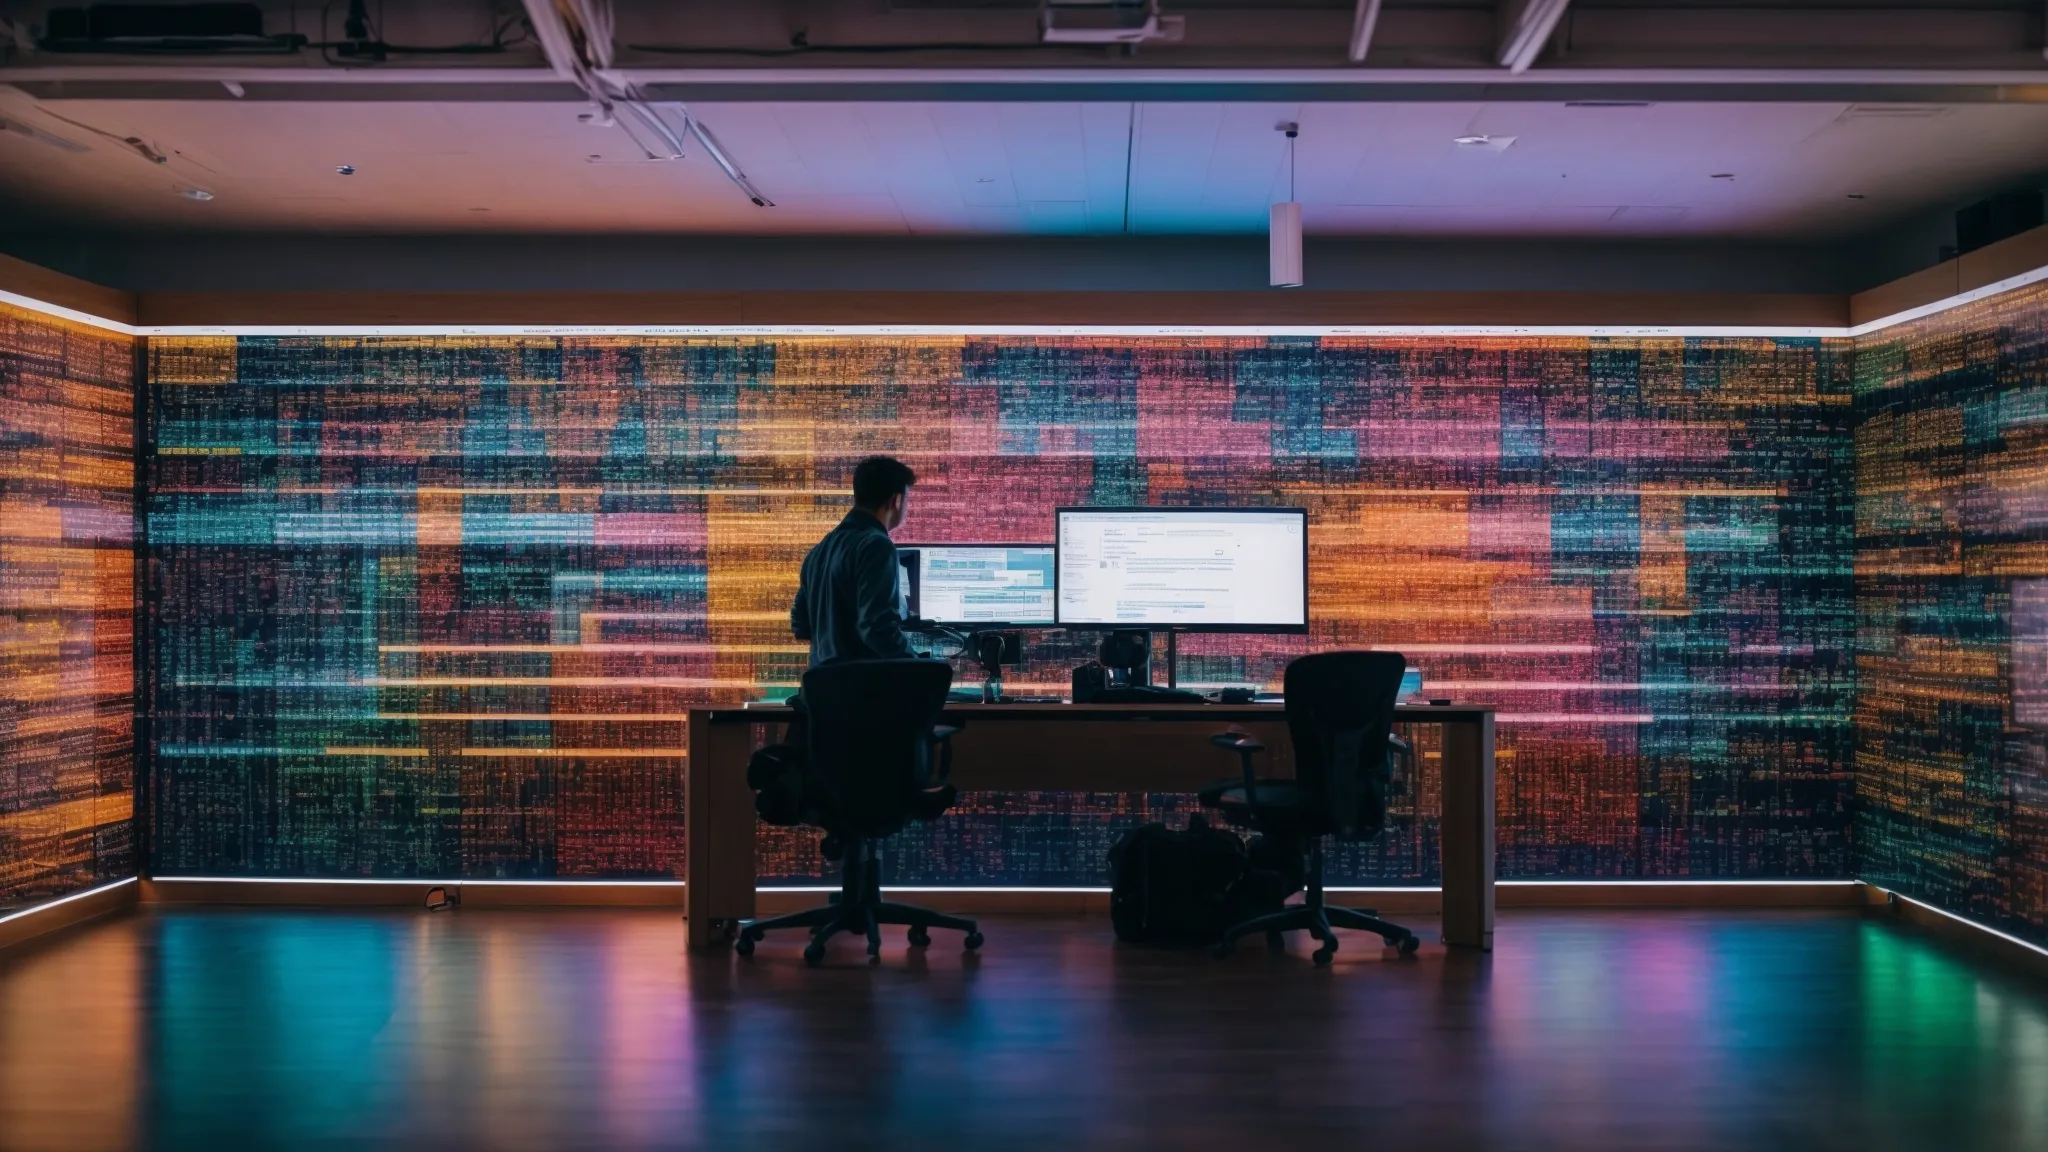 inside a brightly lit library, a web developer sits at a large monitor displaying a colorful flowchart that represents google's data aggregation algorithm for knowledge panels.